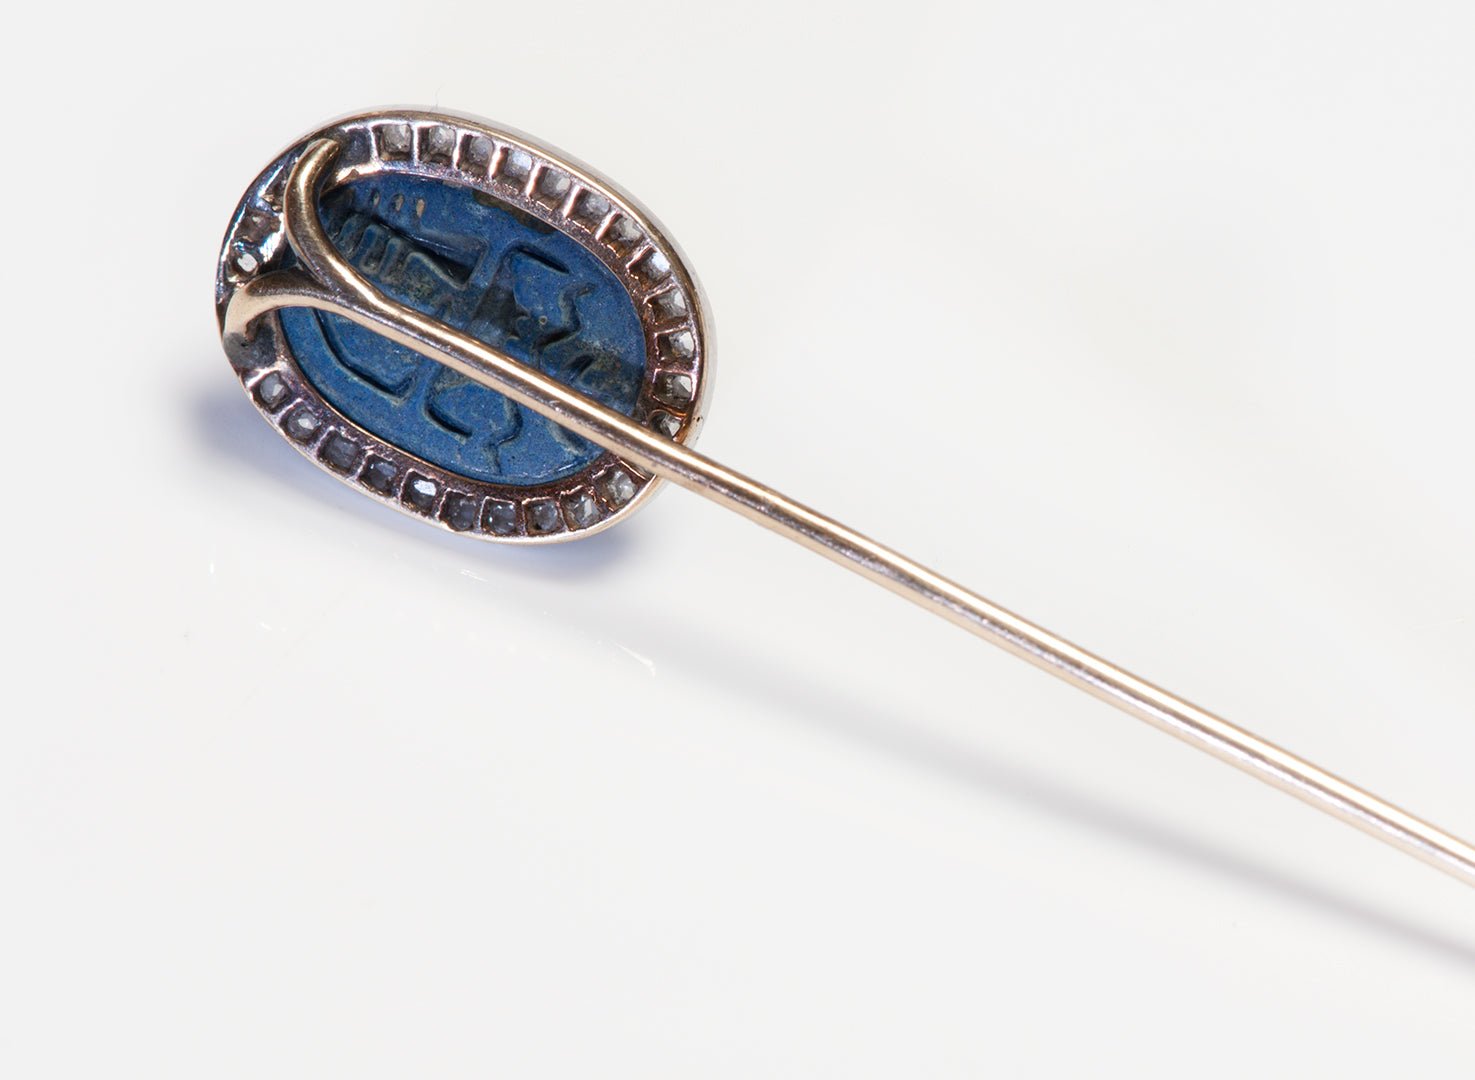 Antique Egyptian Revival Carved Scarab Lapis Diamond Gold Stick Pin - DSF Antique Jewelry